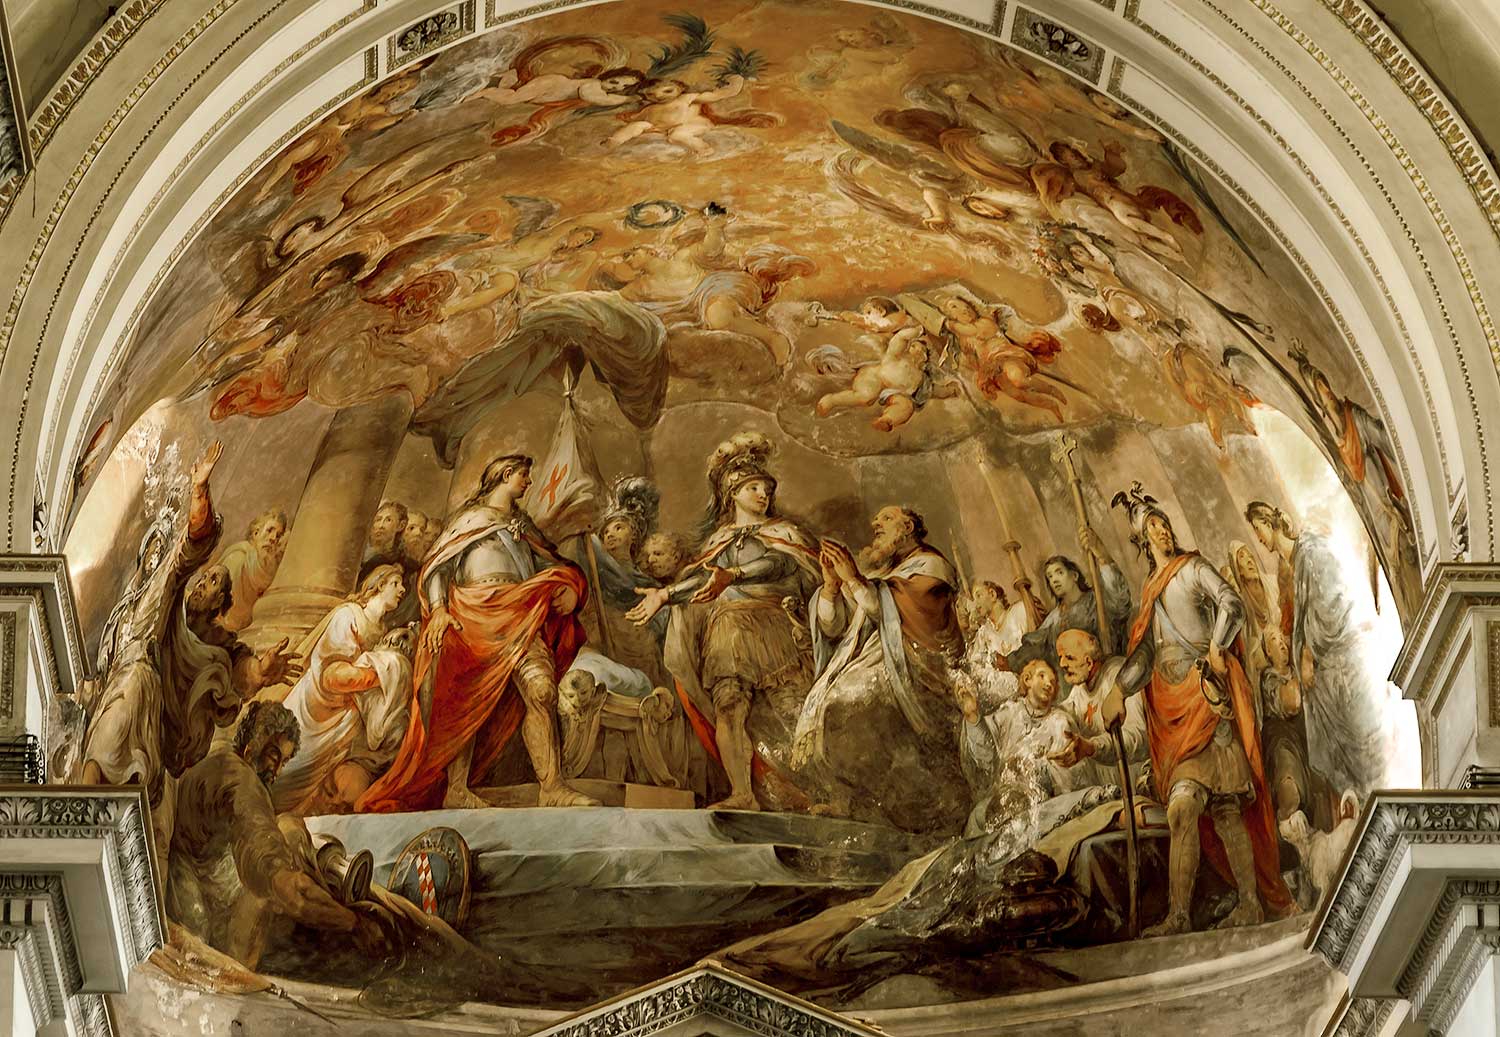 The fresco in the apse of the cathedral